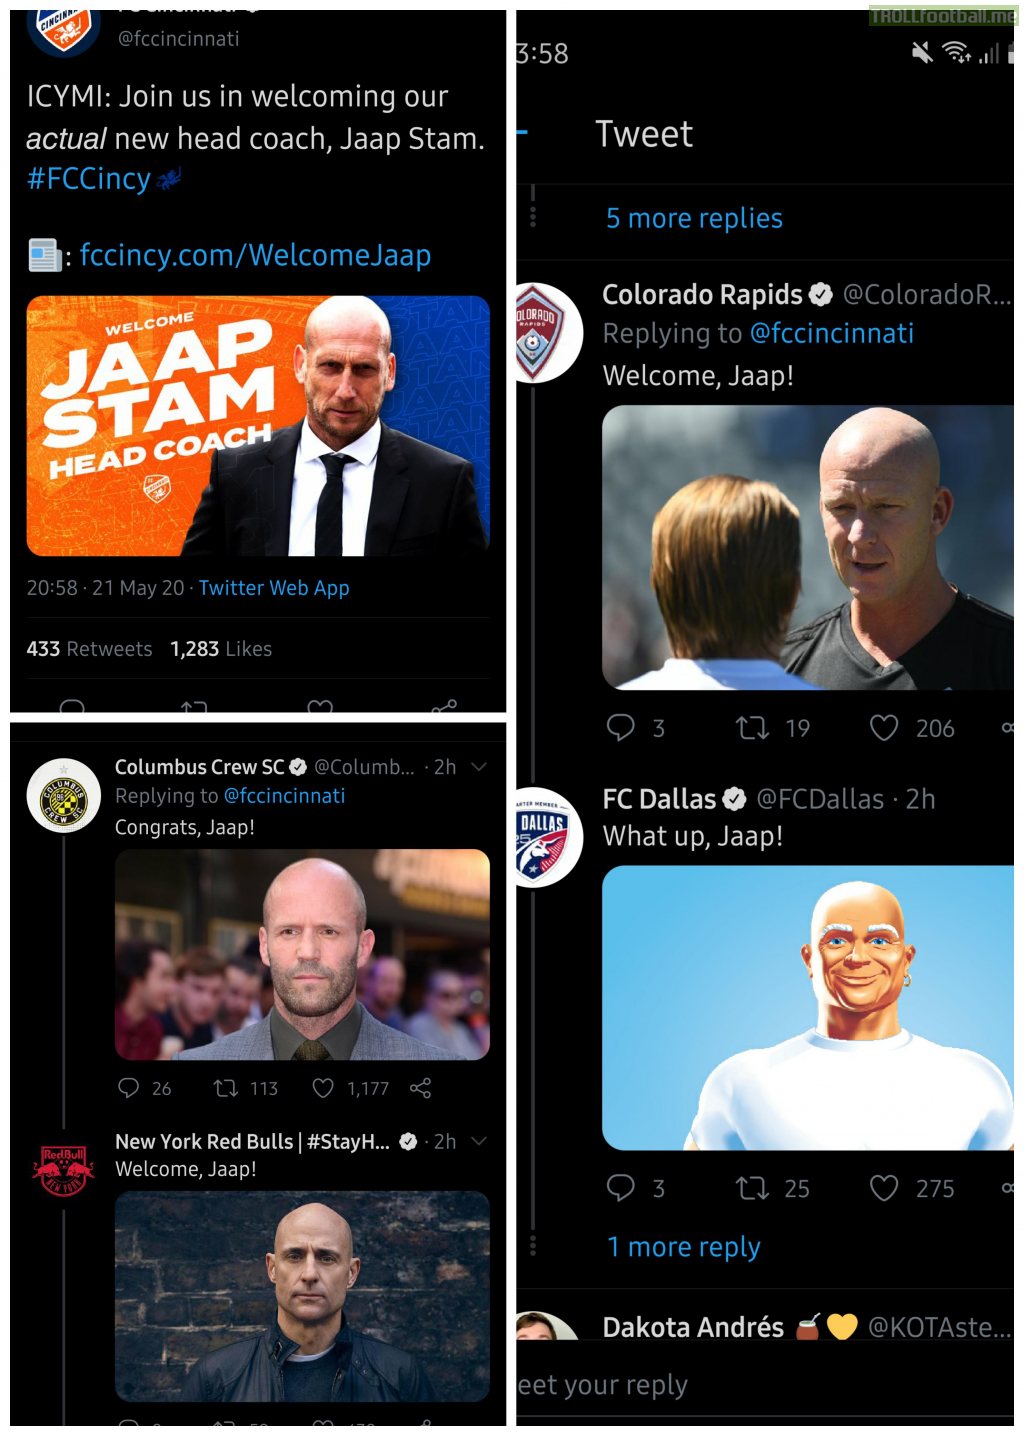 After FC Cincinnati used a picture of another person to introduce Jaap Stam, the other clubs did not forget when they corrected it.